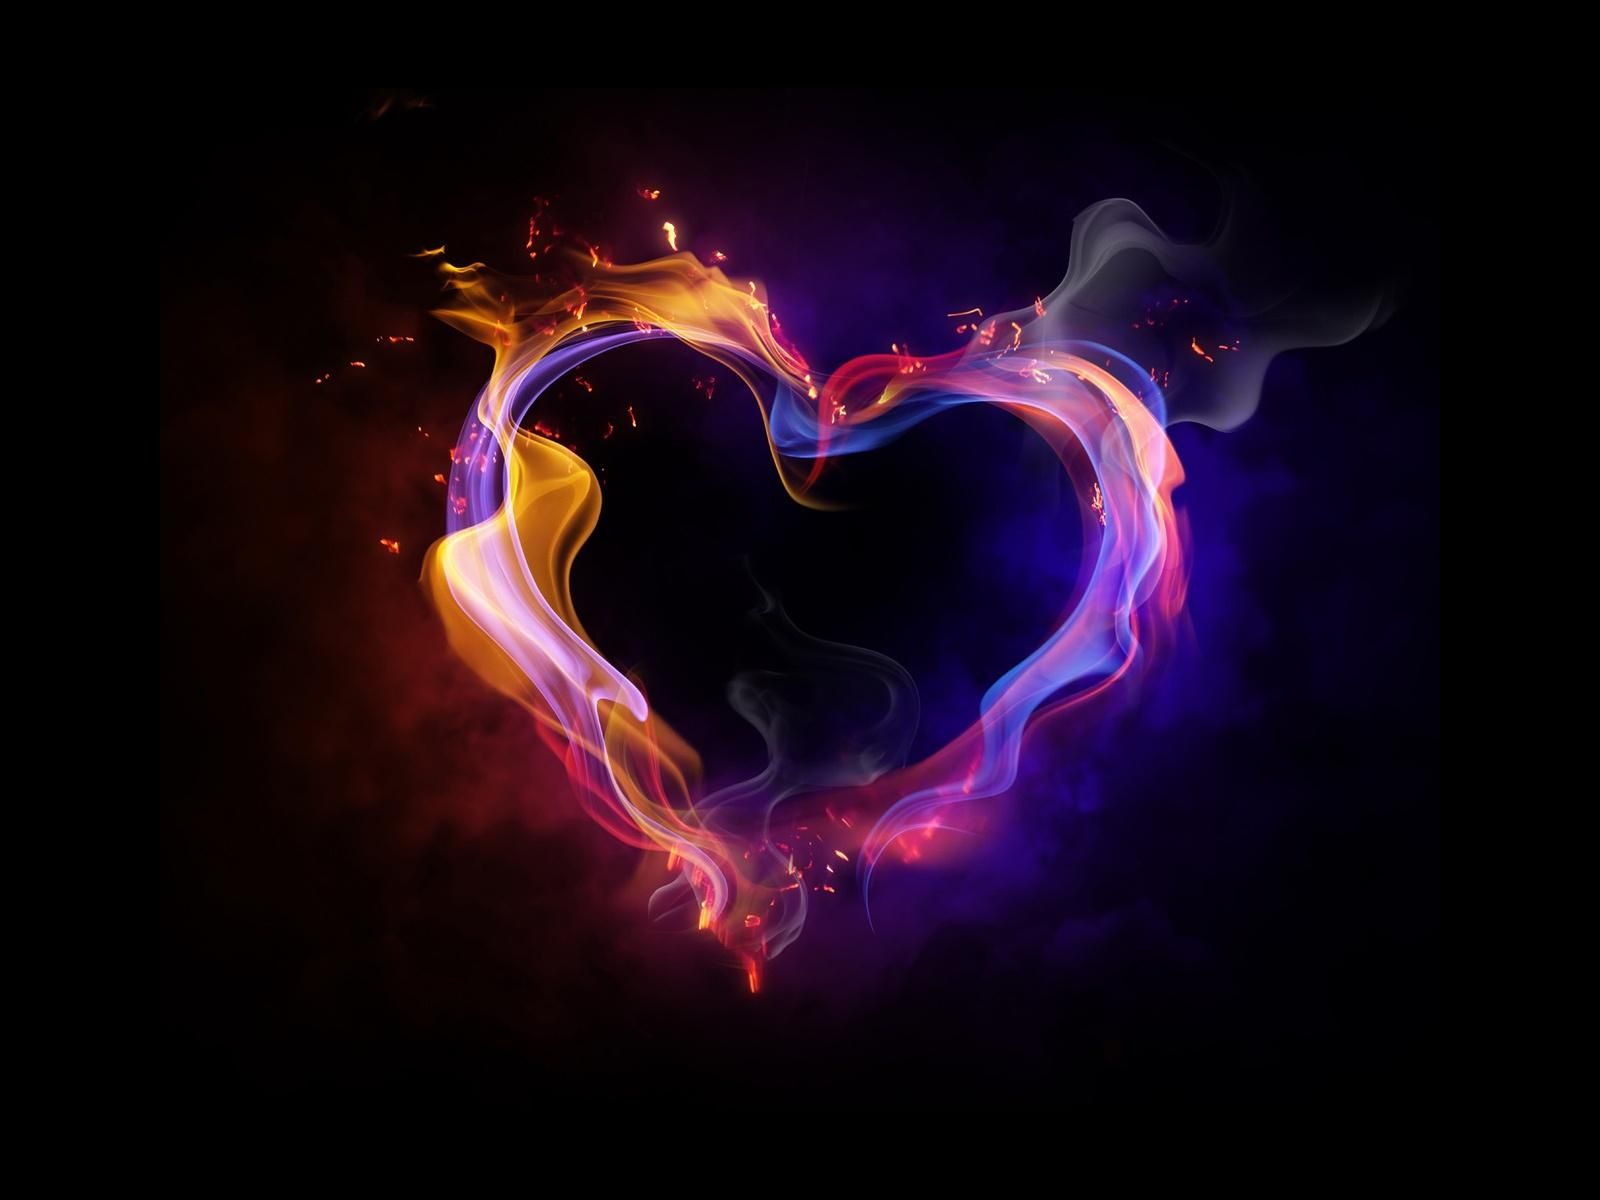 I Love You Heart Images and Desktop Wallpapers-Love Pictures ...